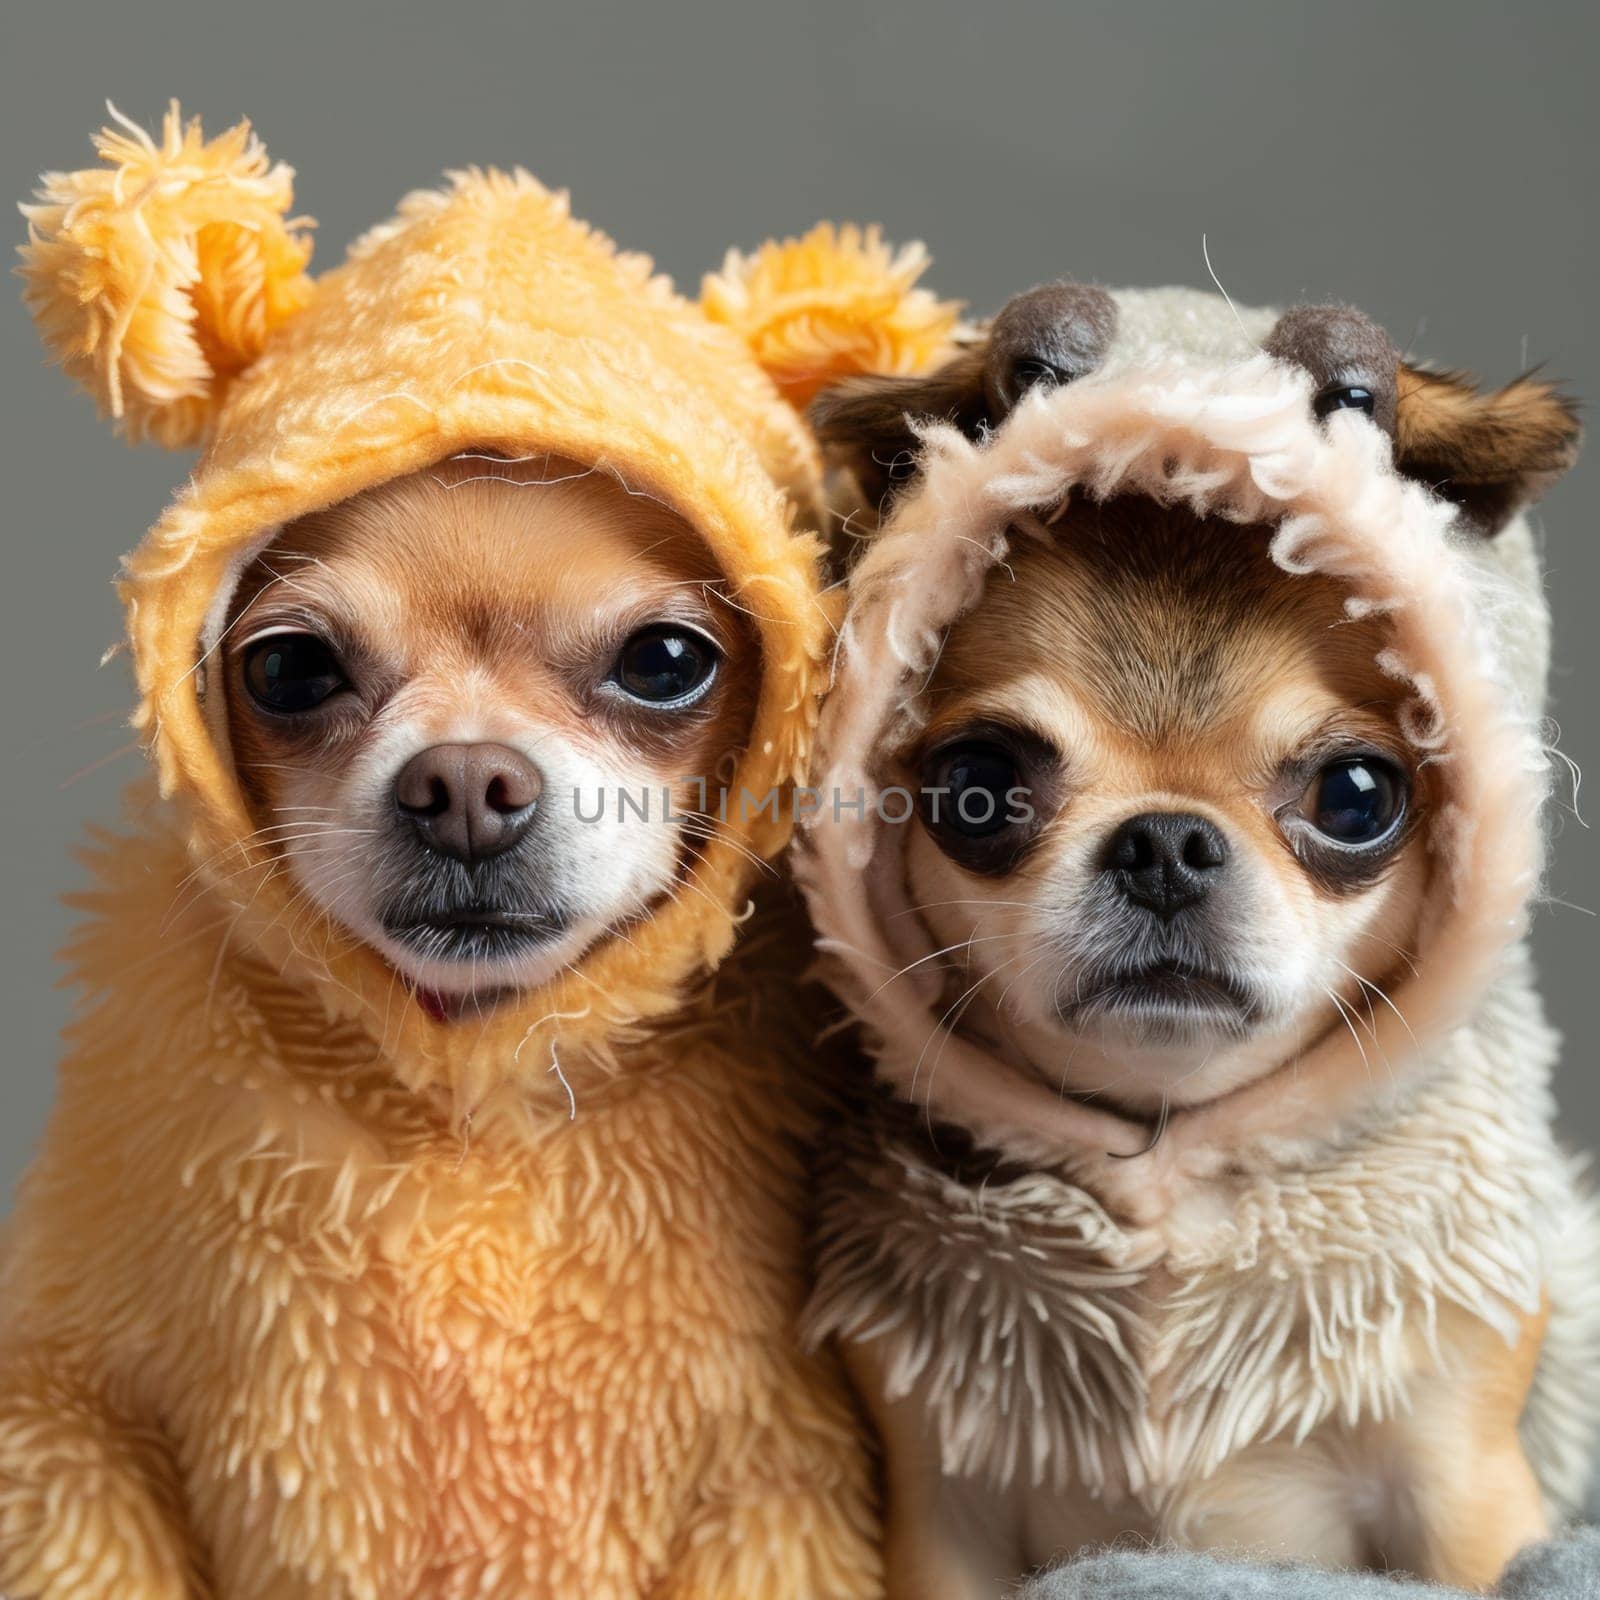 Funny headshot of two chihuahuas dressed as guinea pig.